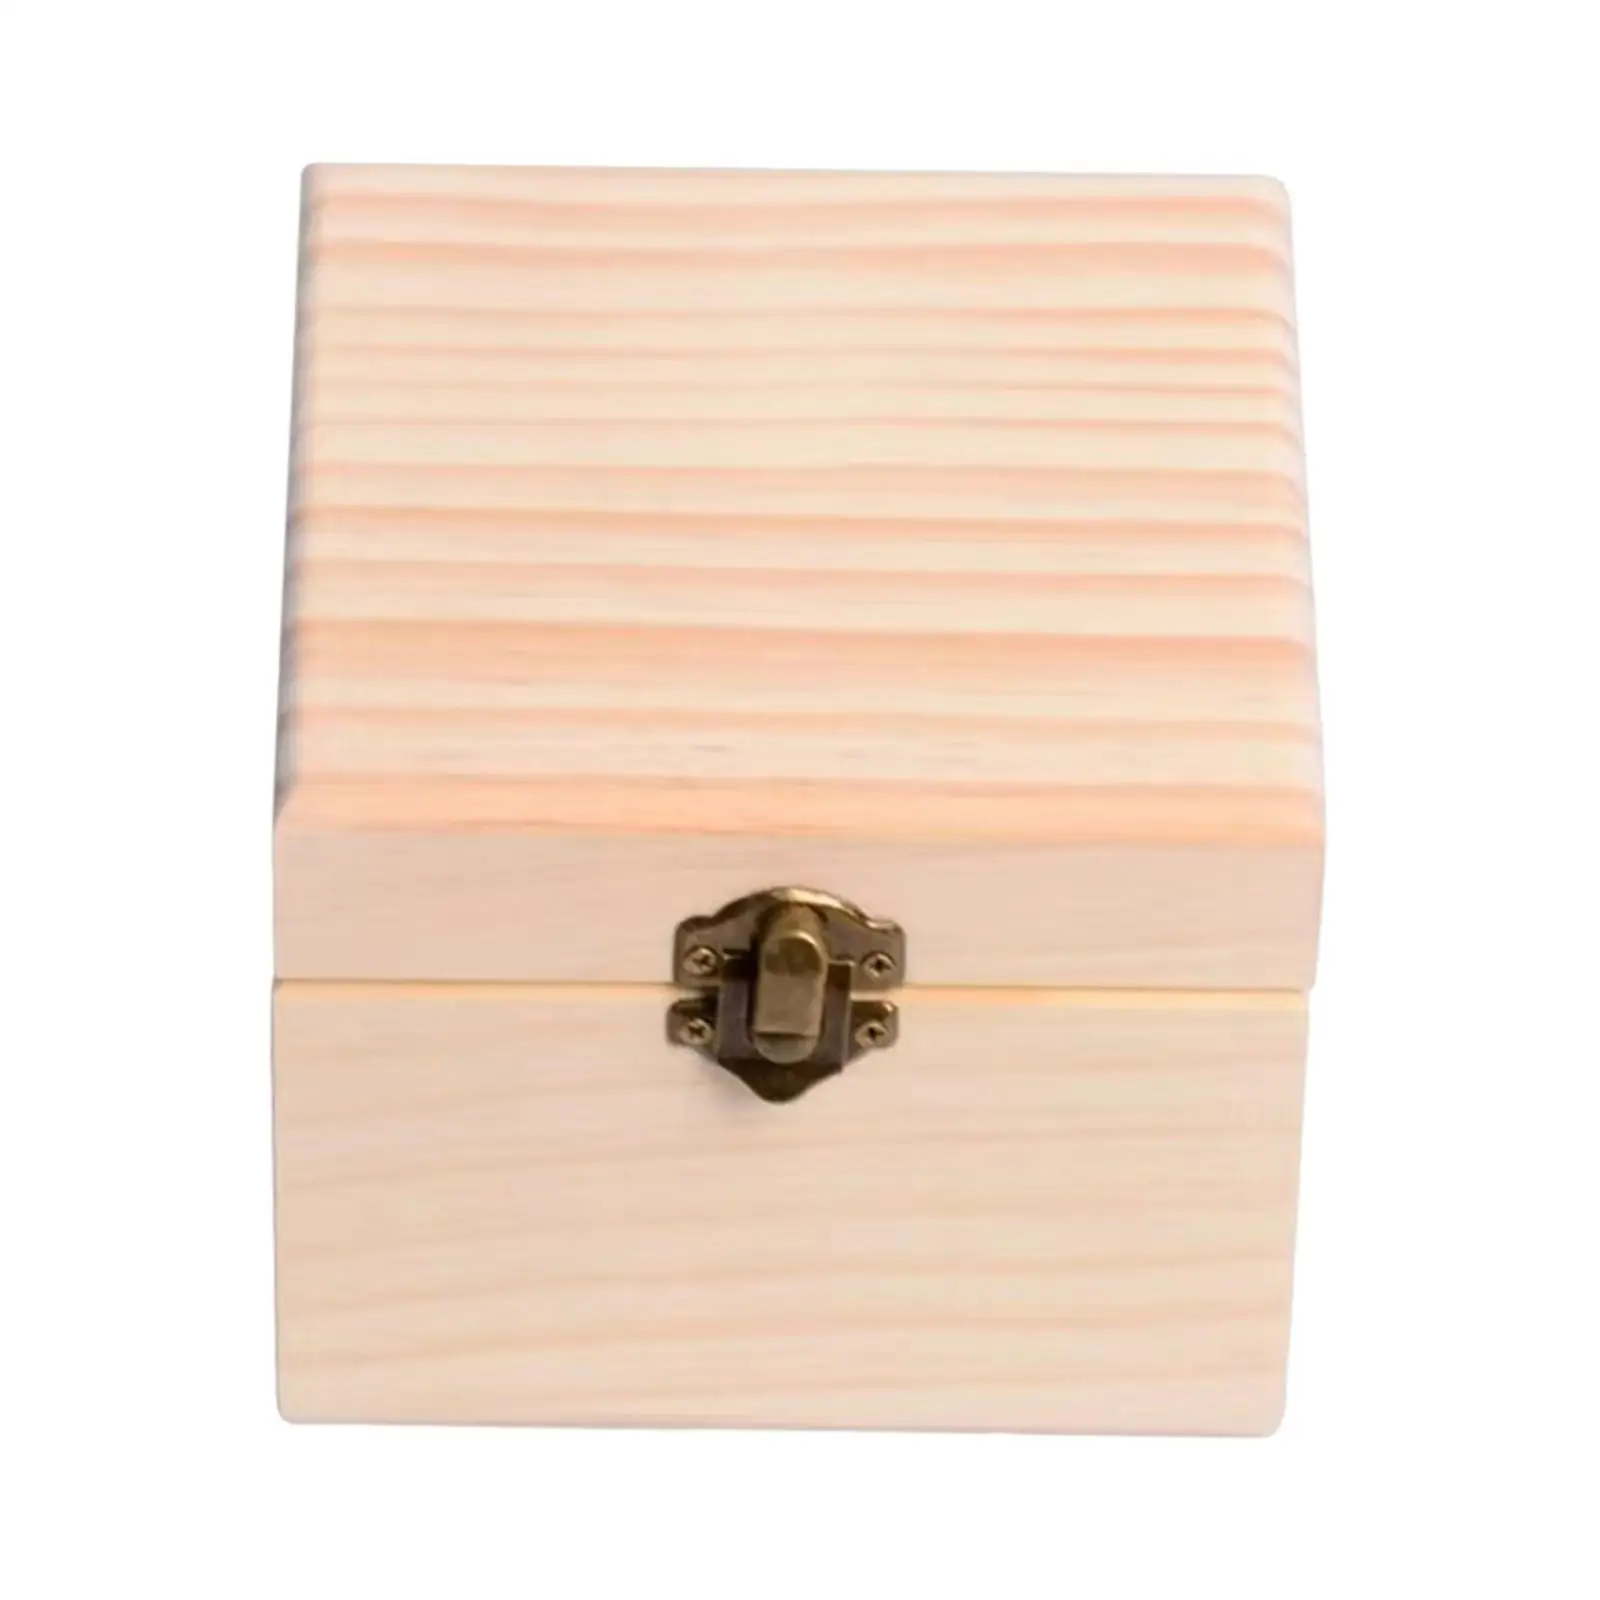 Oils Storage Case Wooden  Oil Box with Lid 16 Compartments Perfume Container Organizer for Presentation Display Travel